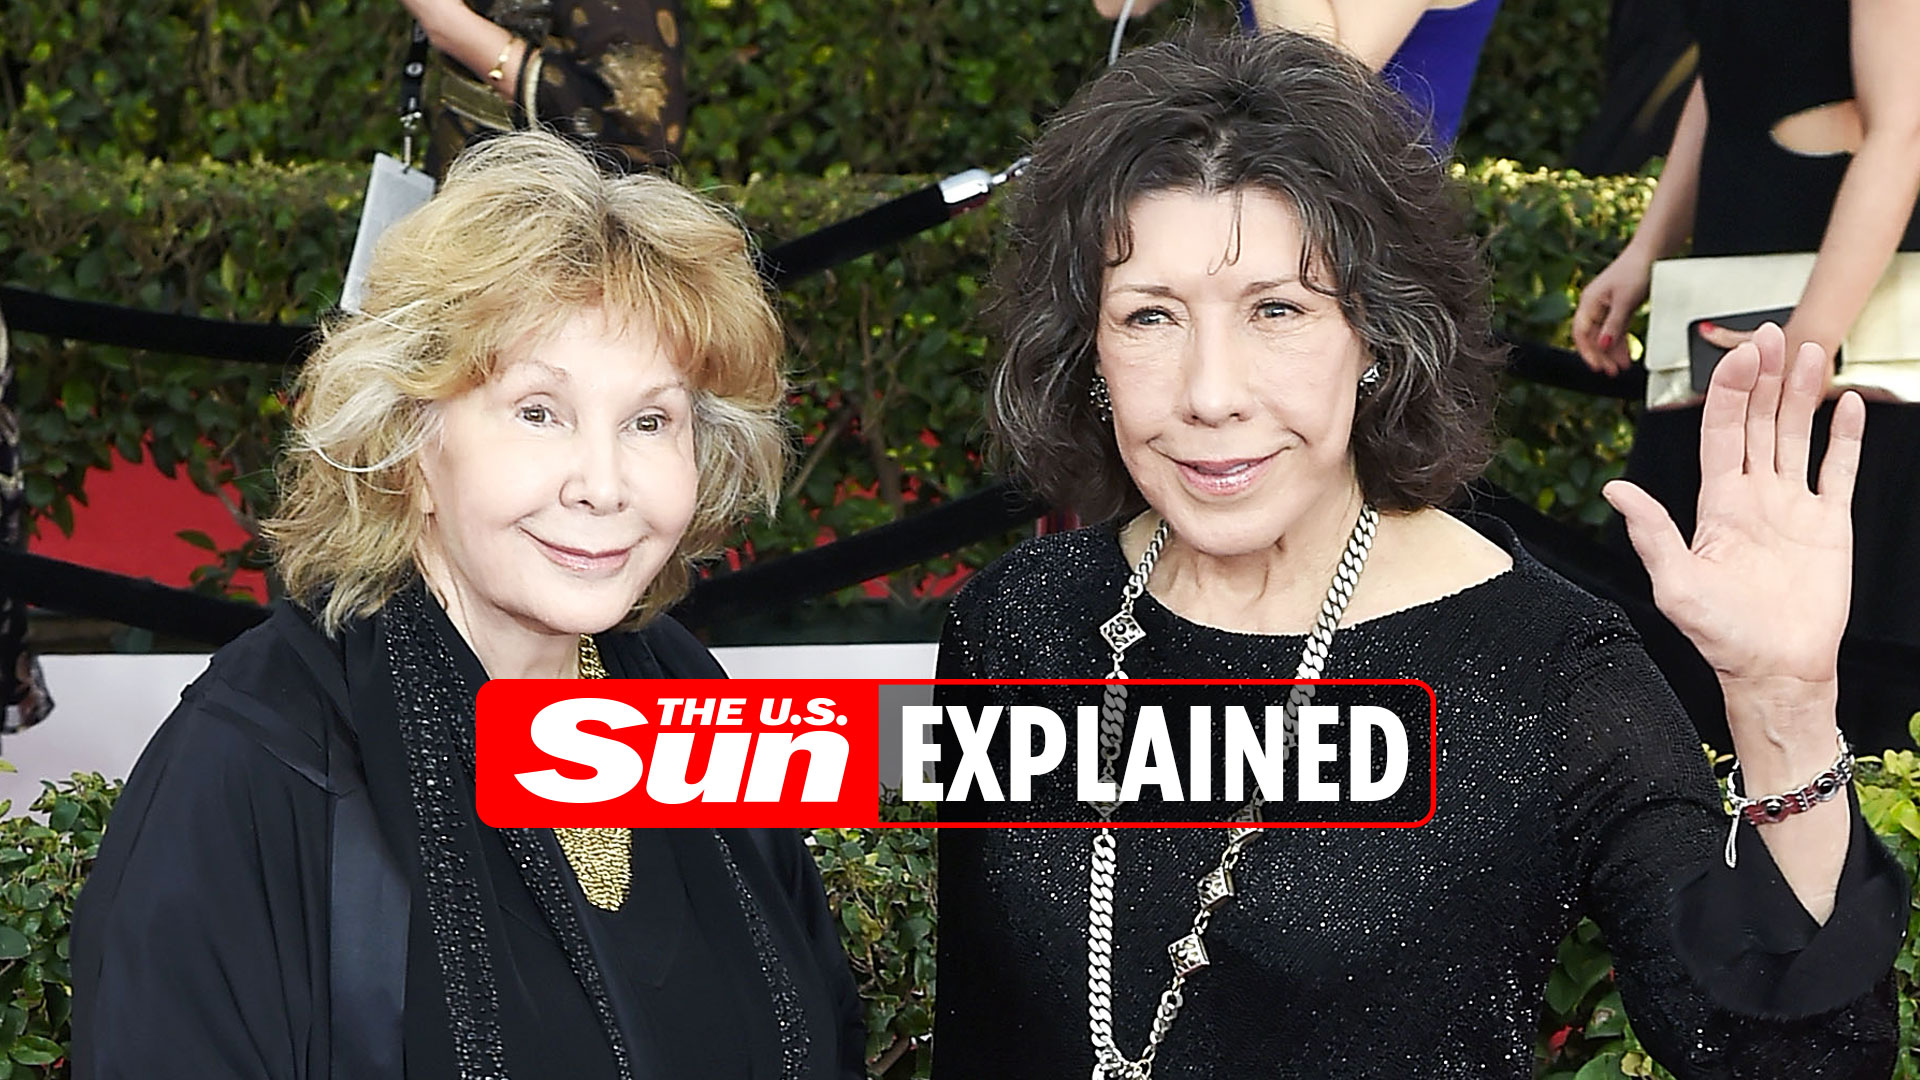 Who is Lily Tomlin's wife?